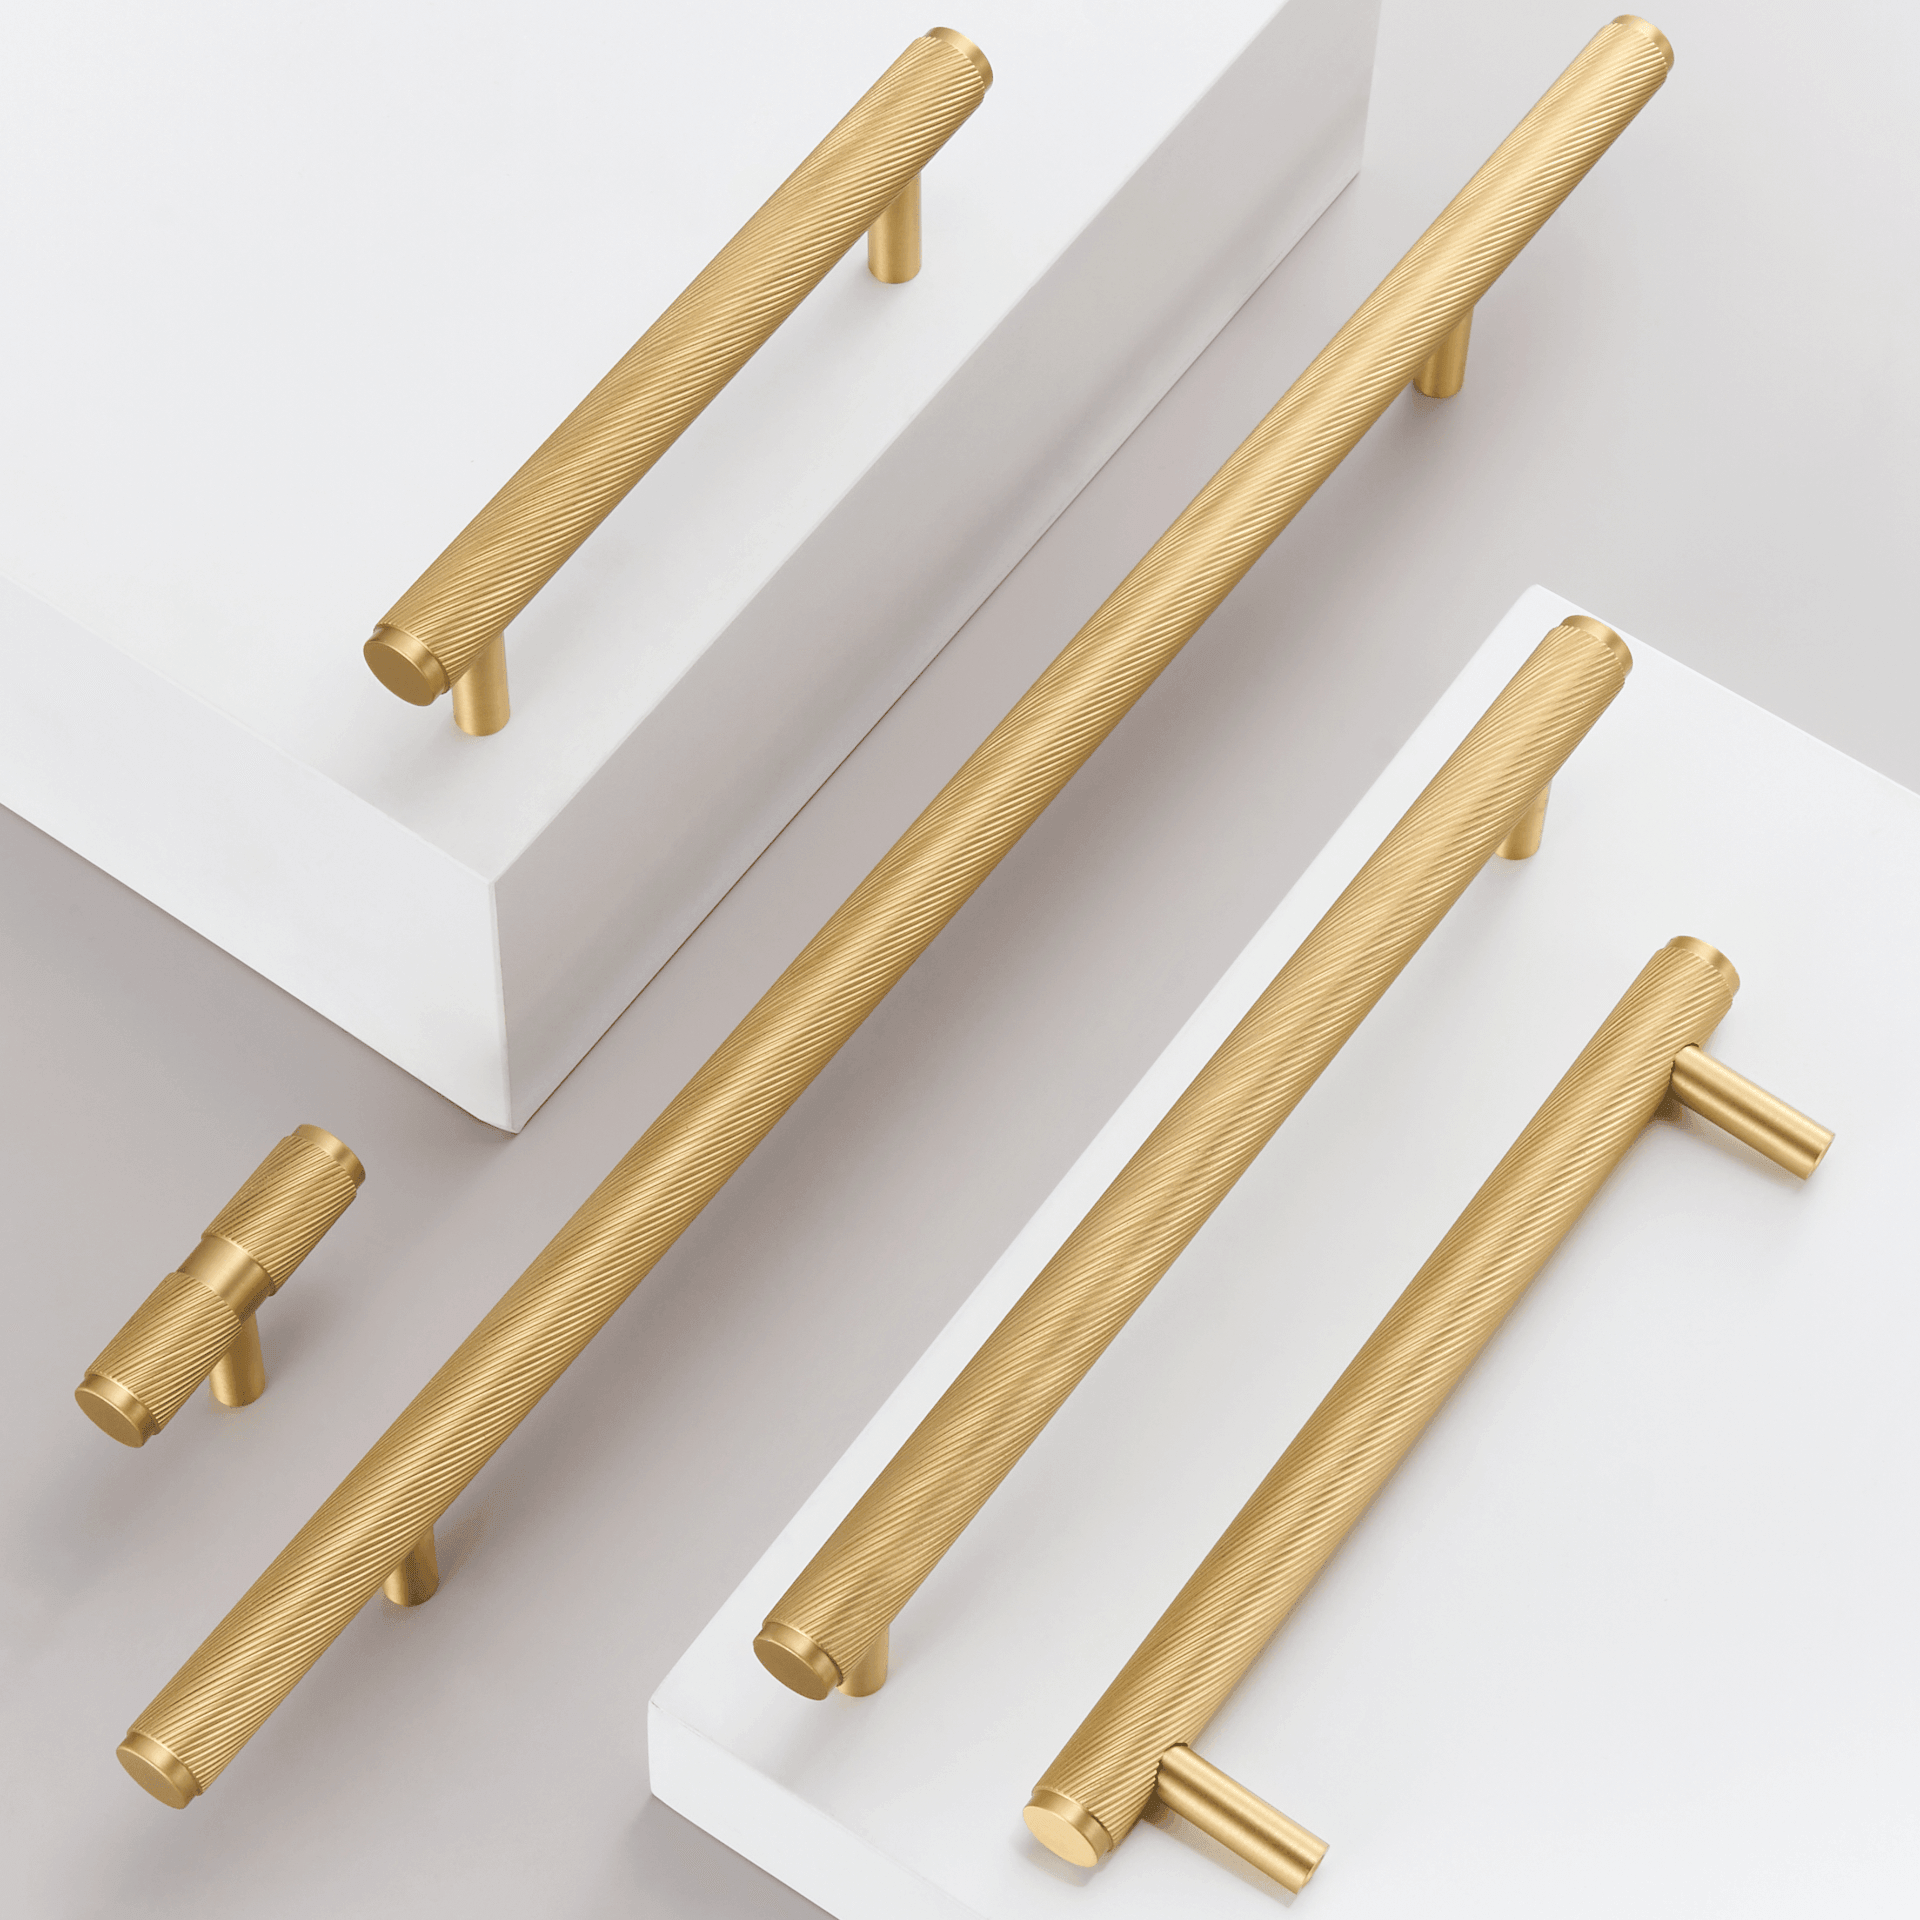 FARO / SOLID BRASS HANDLES / SWIRLED KNURL - Handle Shop Couture 